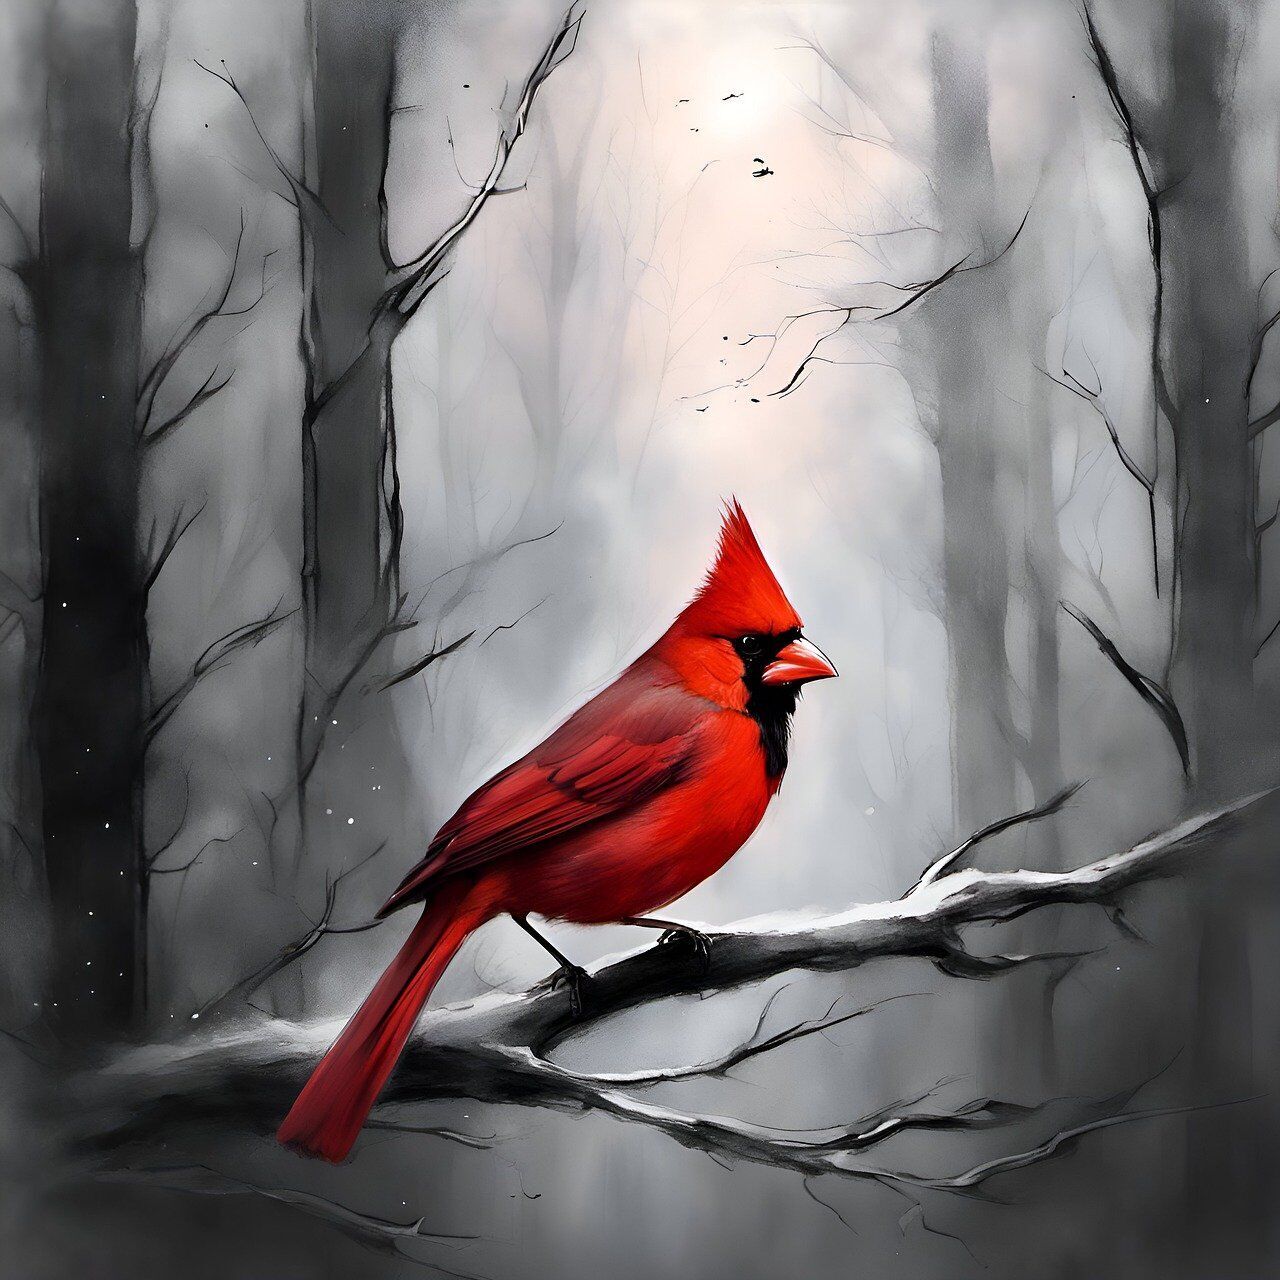 Dreaming about Cardinal - what does it mean?